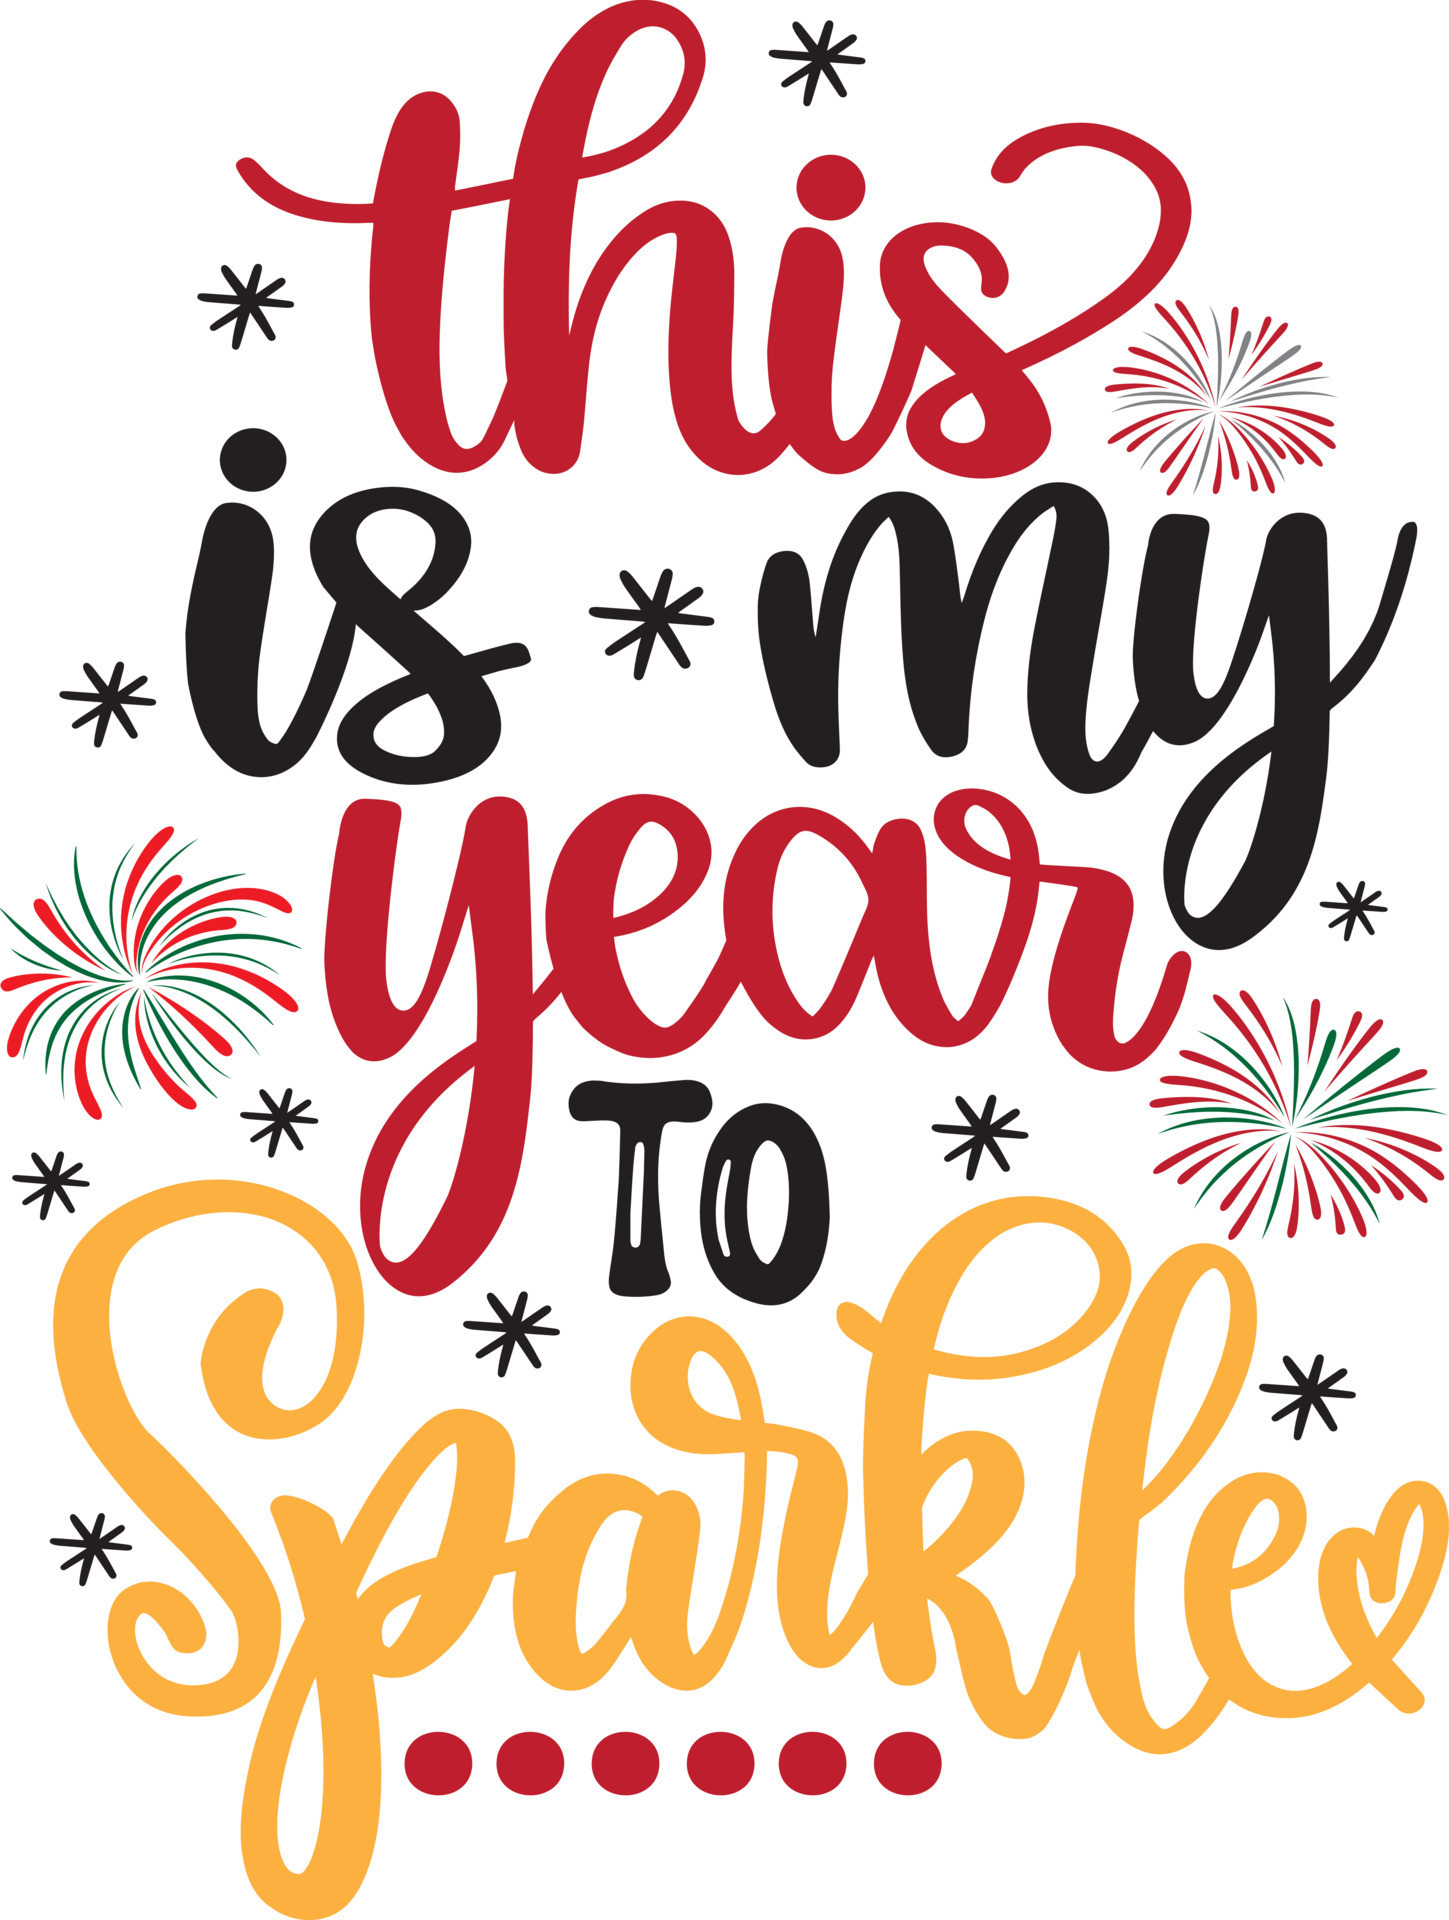 https://static.vecteezy.com/system/resources/previews/015/511/518/original/this-is-my-year-to-sparkle-happy-new-year-cheers-to-the-new-year-holiday-illustration-file-vector.jpg